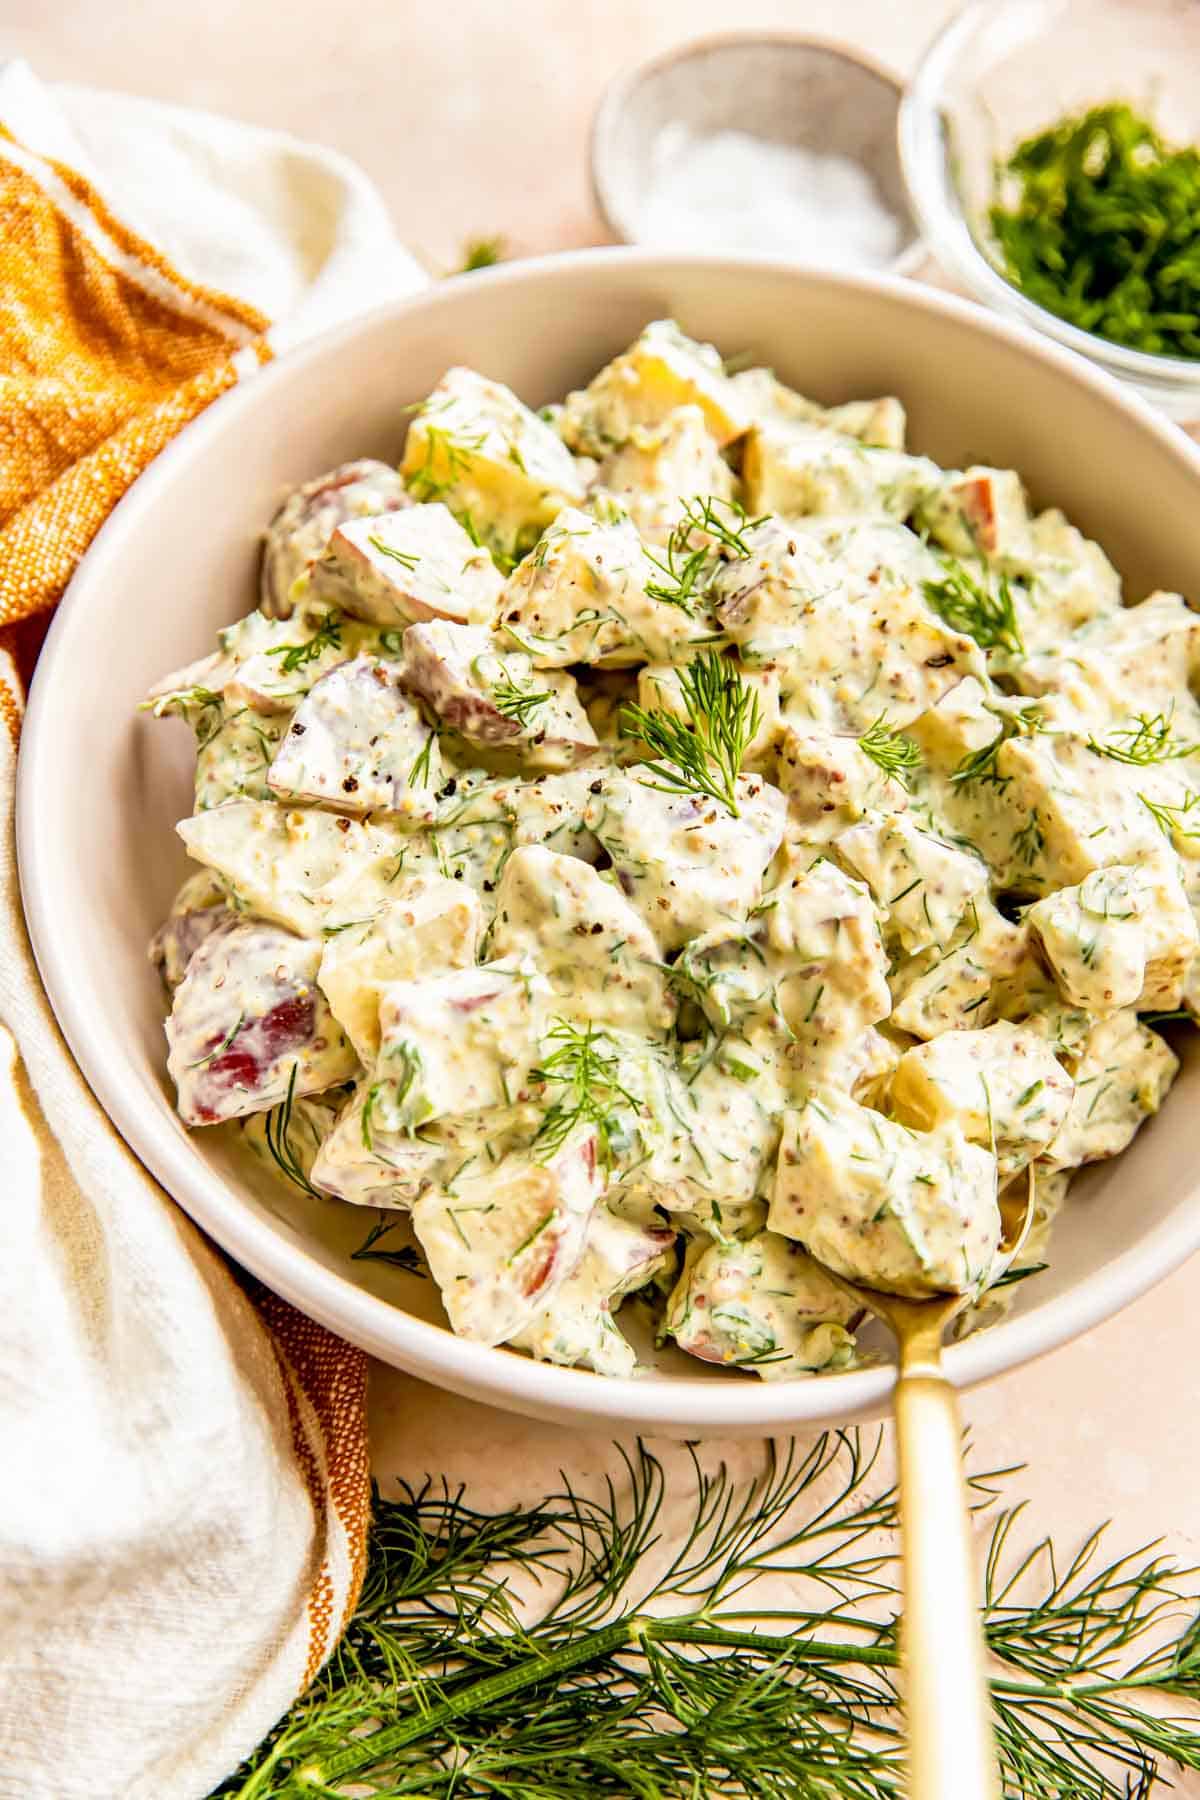 A bowl is filled with creamy dill potato salad.